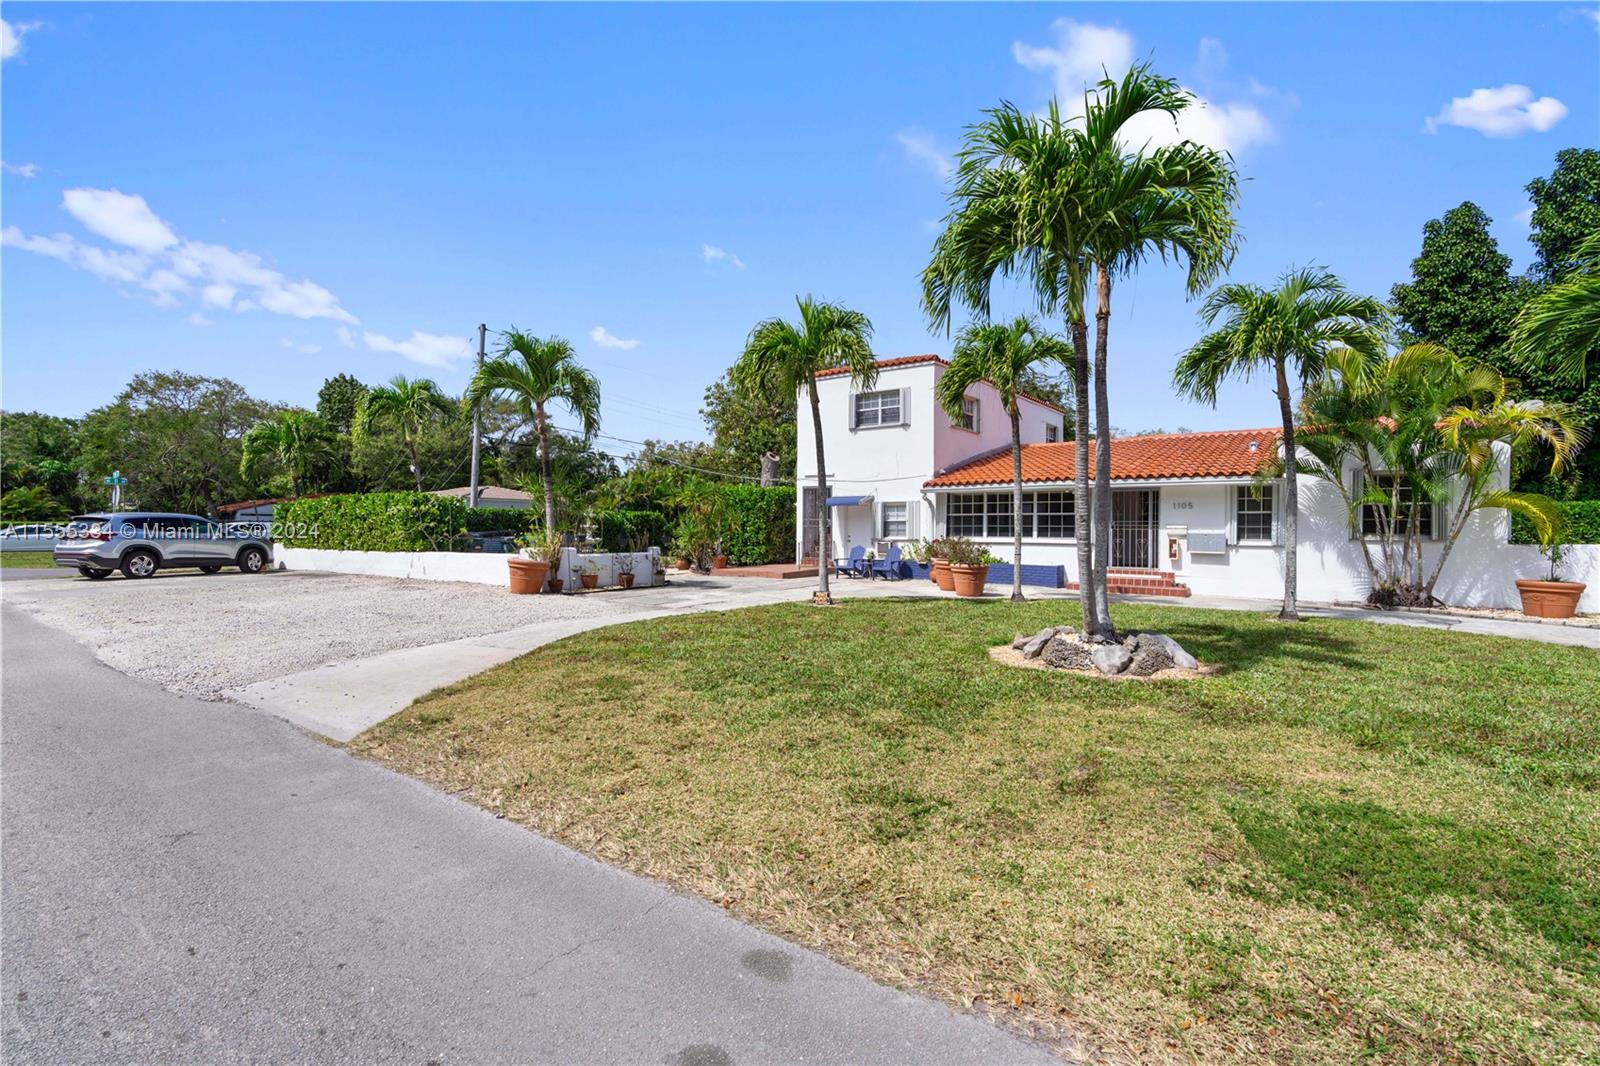 Rental Property at 1105 Ne 119th St St, Biscayne Park, Miami-Dade County, Florida -  - $1,249,998 MO.